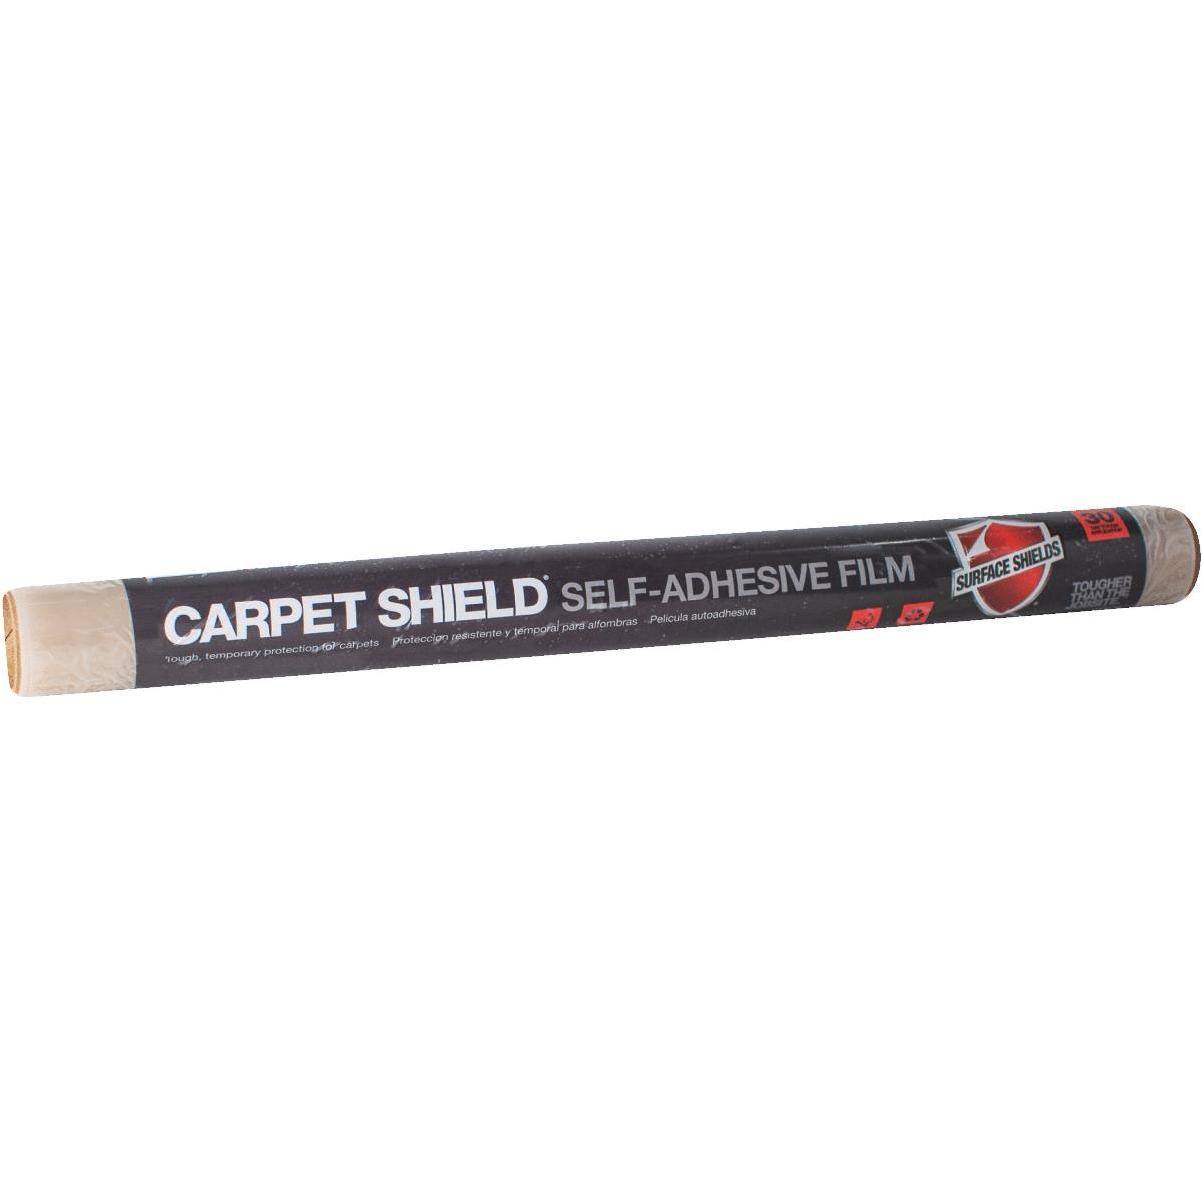 Surface Shields Carpet Shield 24 In Self-Adhesive Film Floor Protector x 50 Ft 